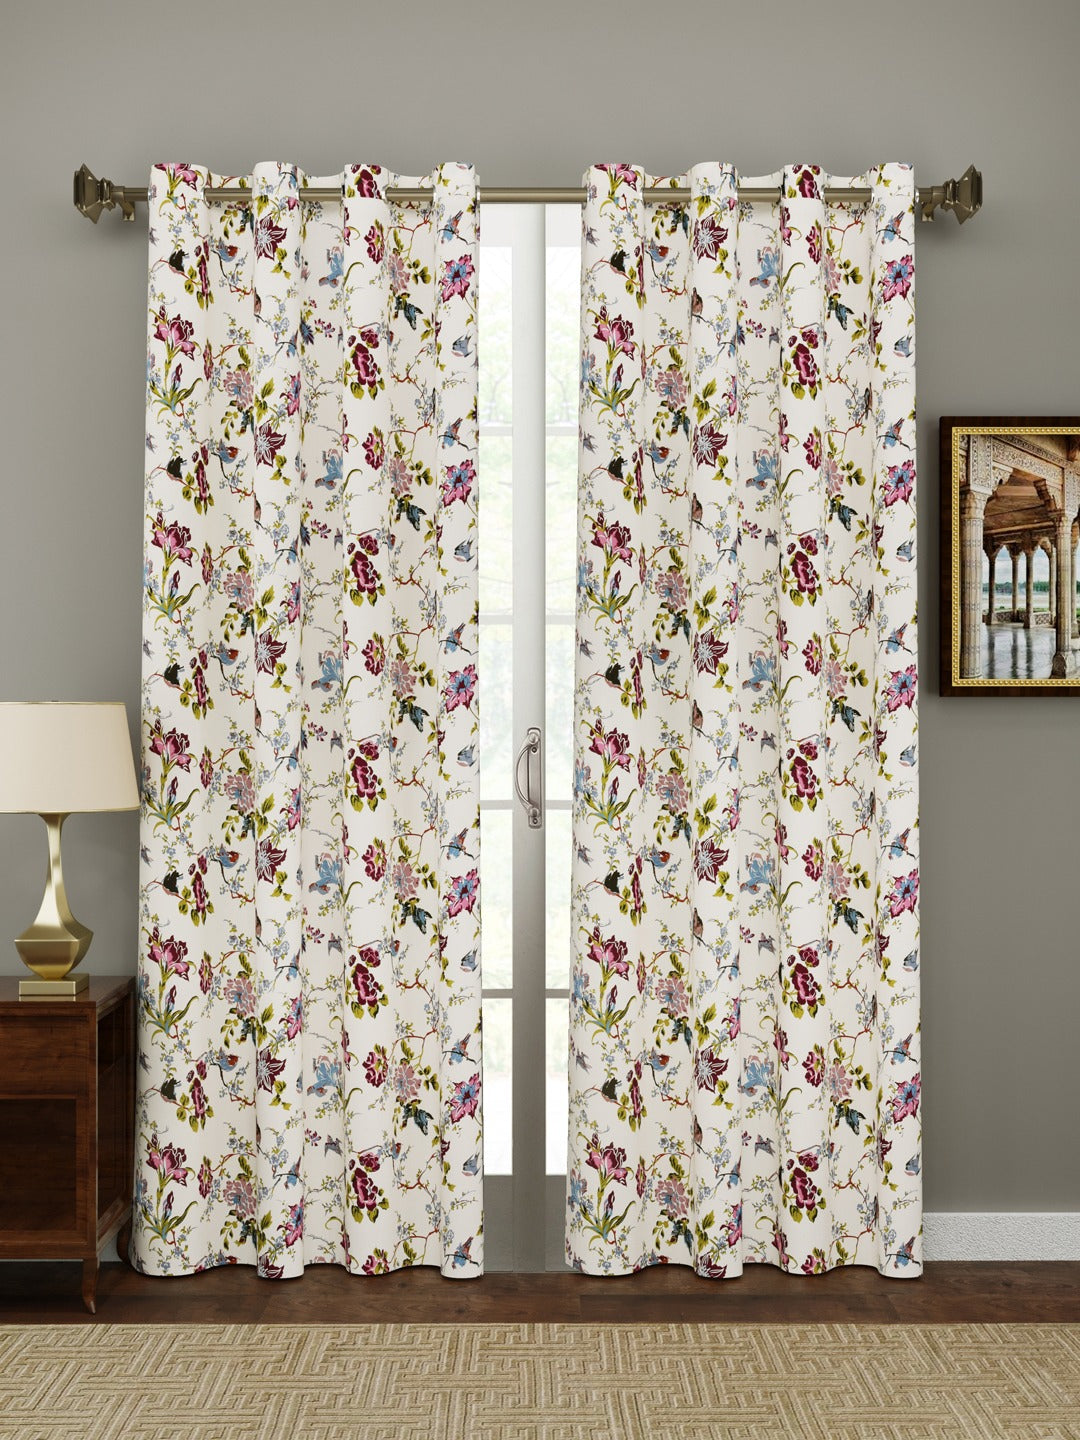 Cotton Floral Printed Curtains - Set of 2 - 7X5 feet